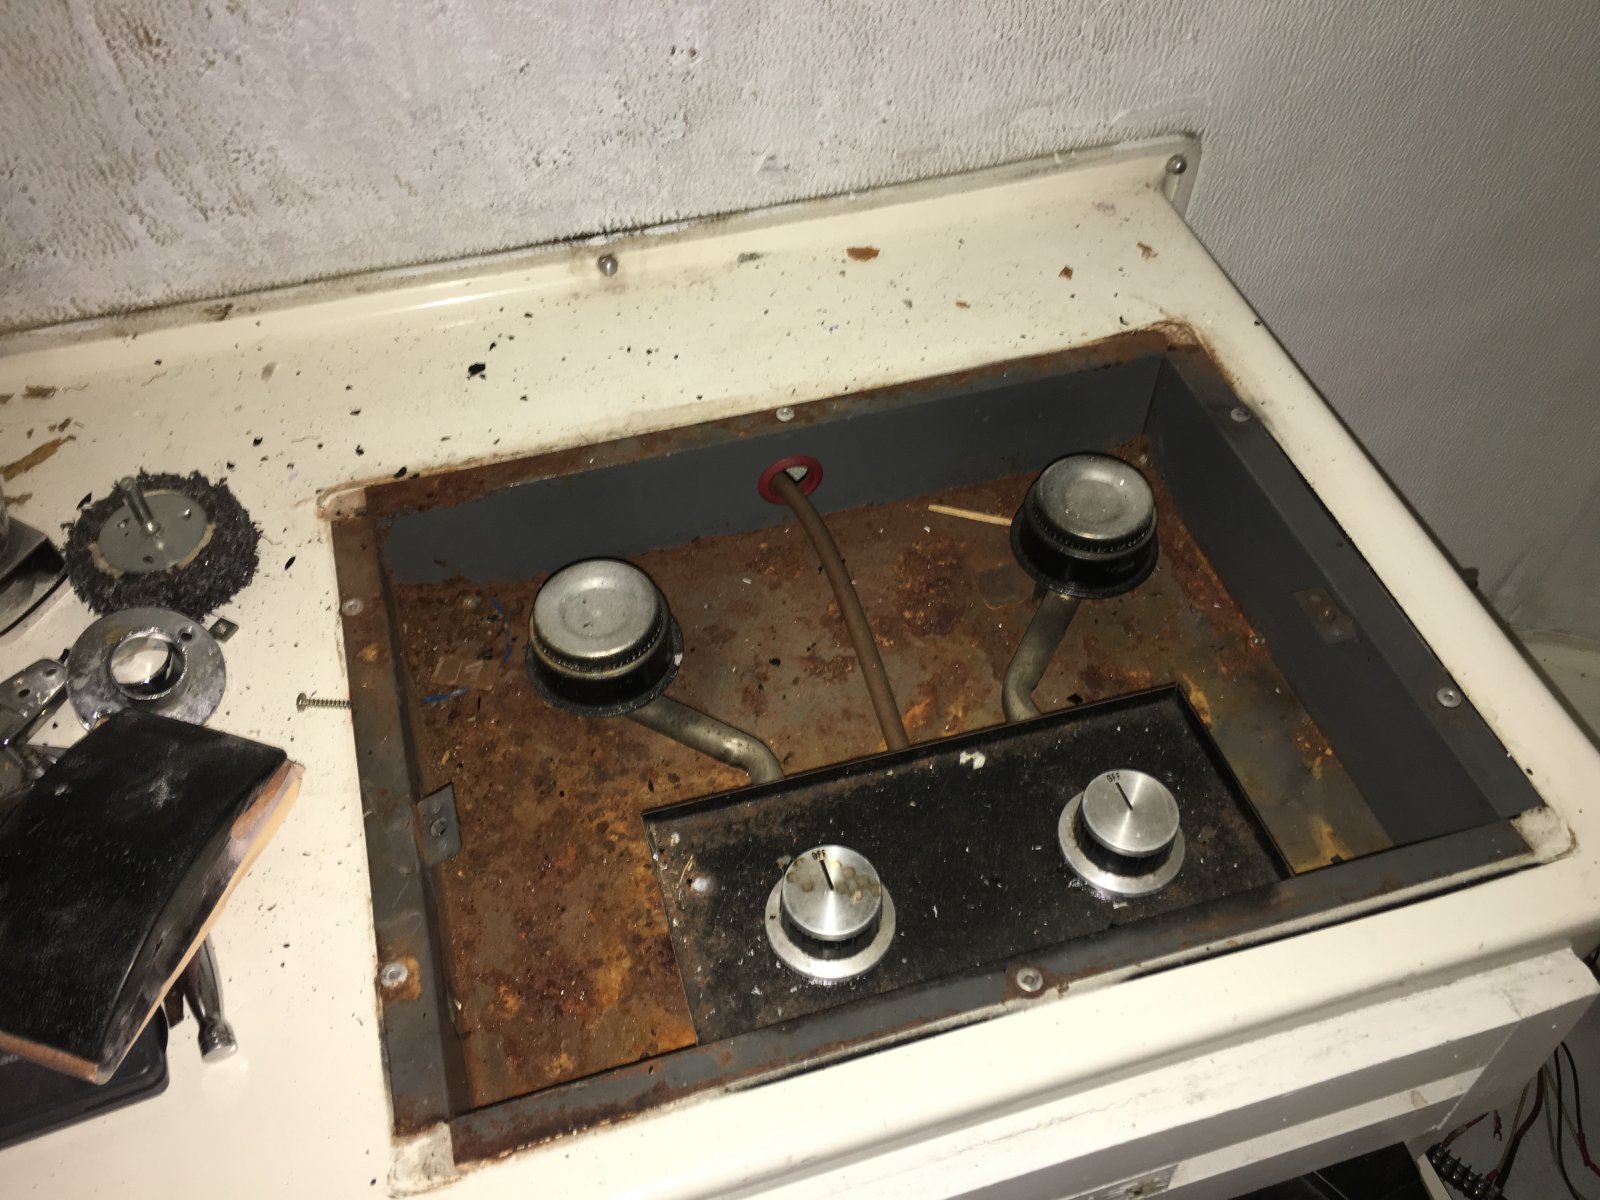 I didn't have a lot of faith in this 50-year-old propane stove, nor did I really want to be cooking eight inches away from where I'd be sleeping.